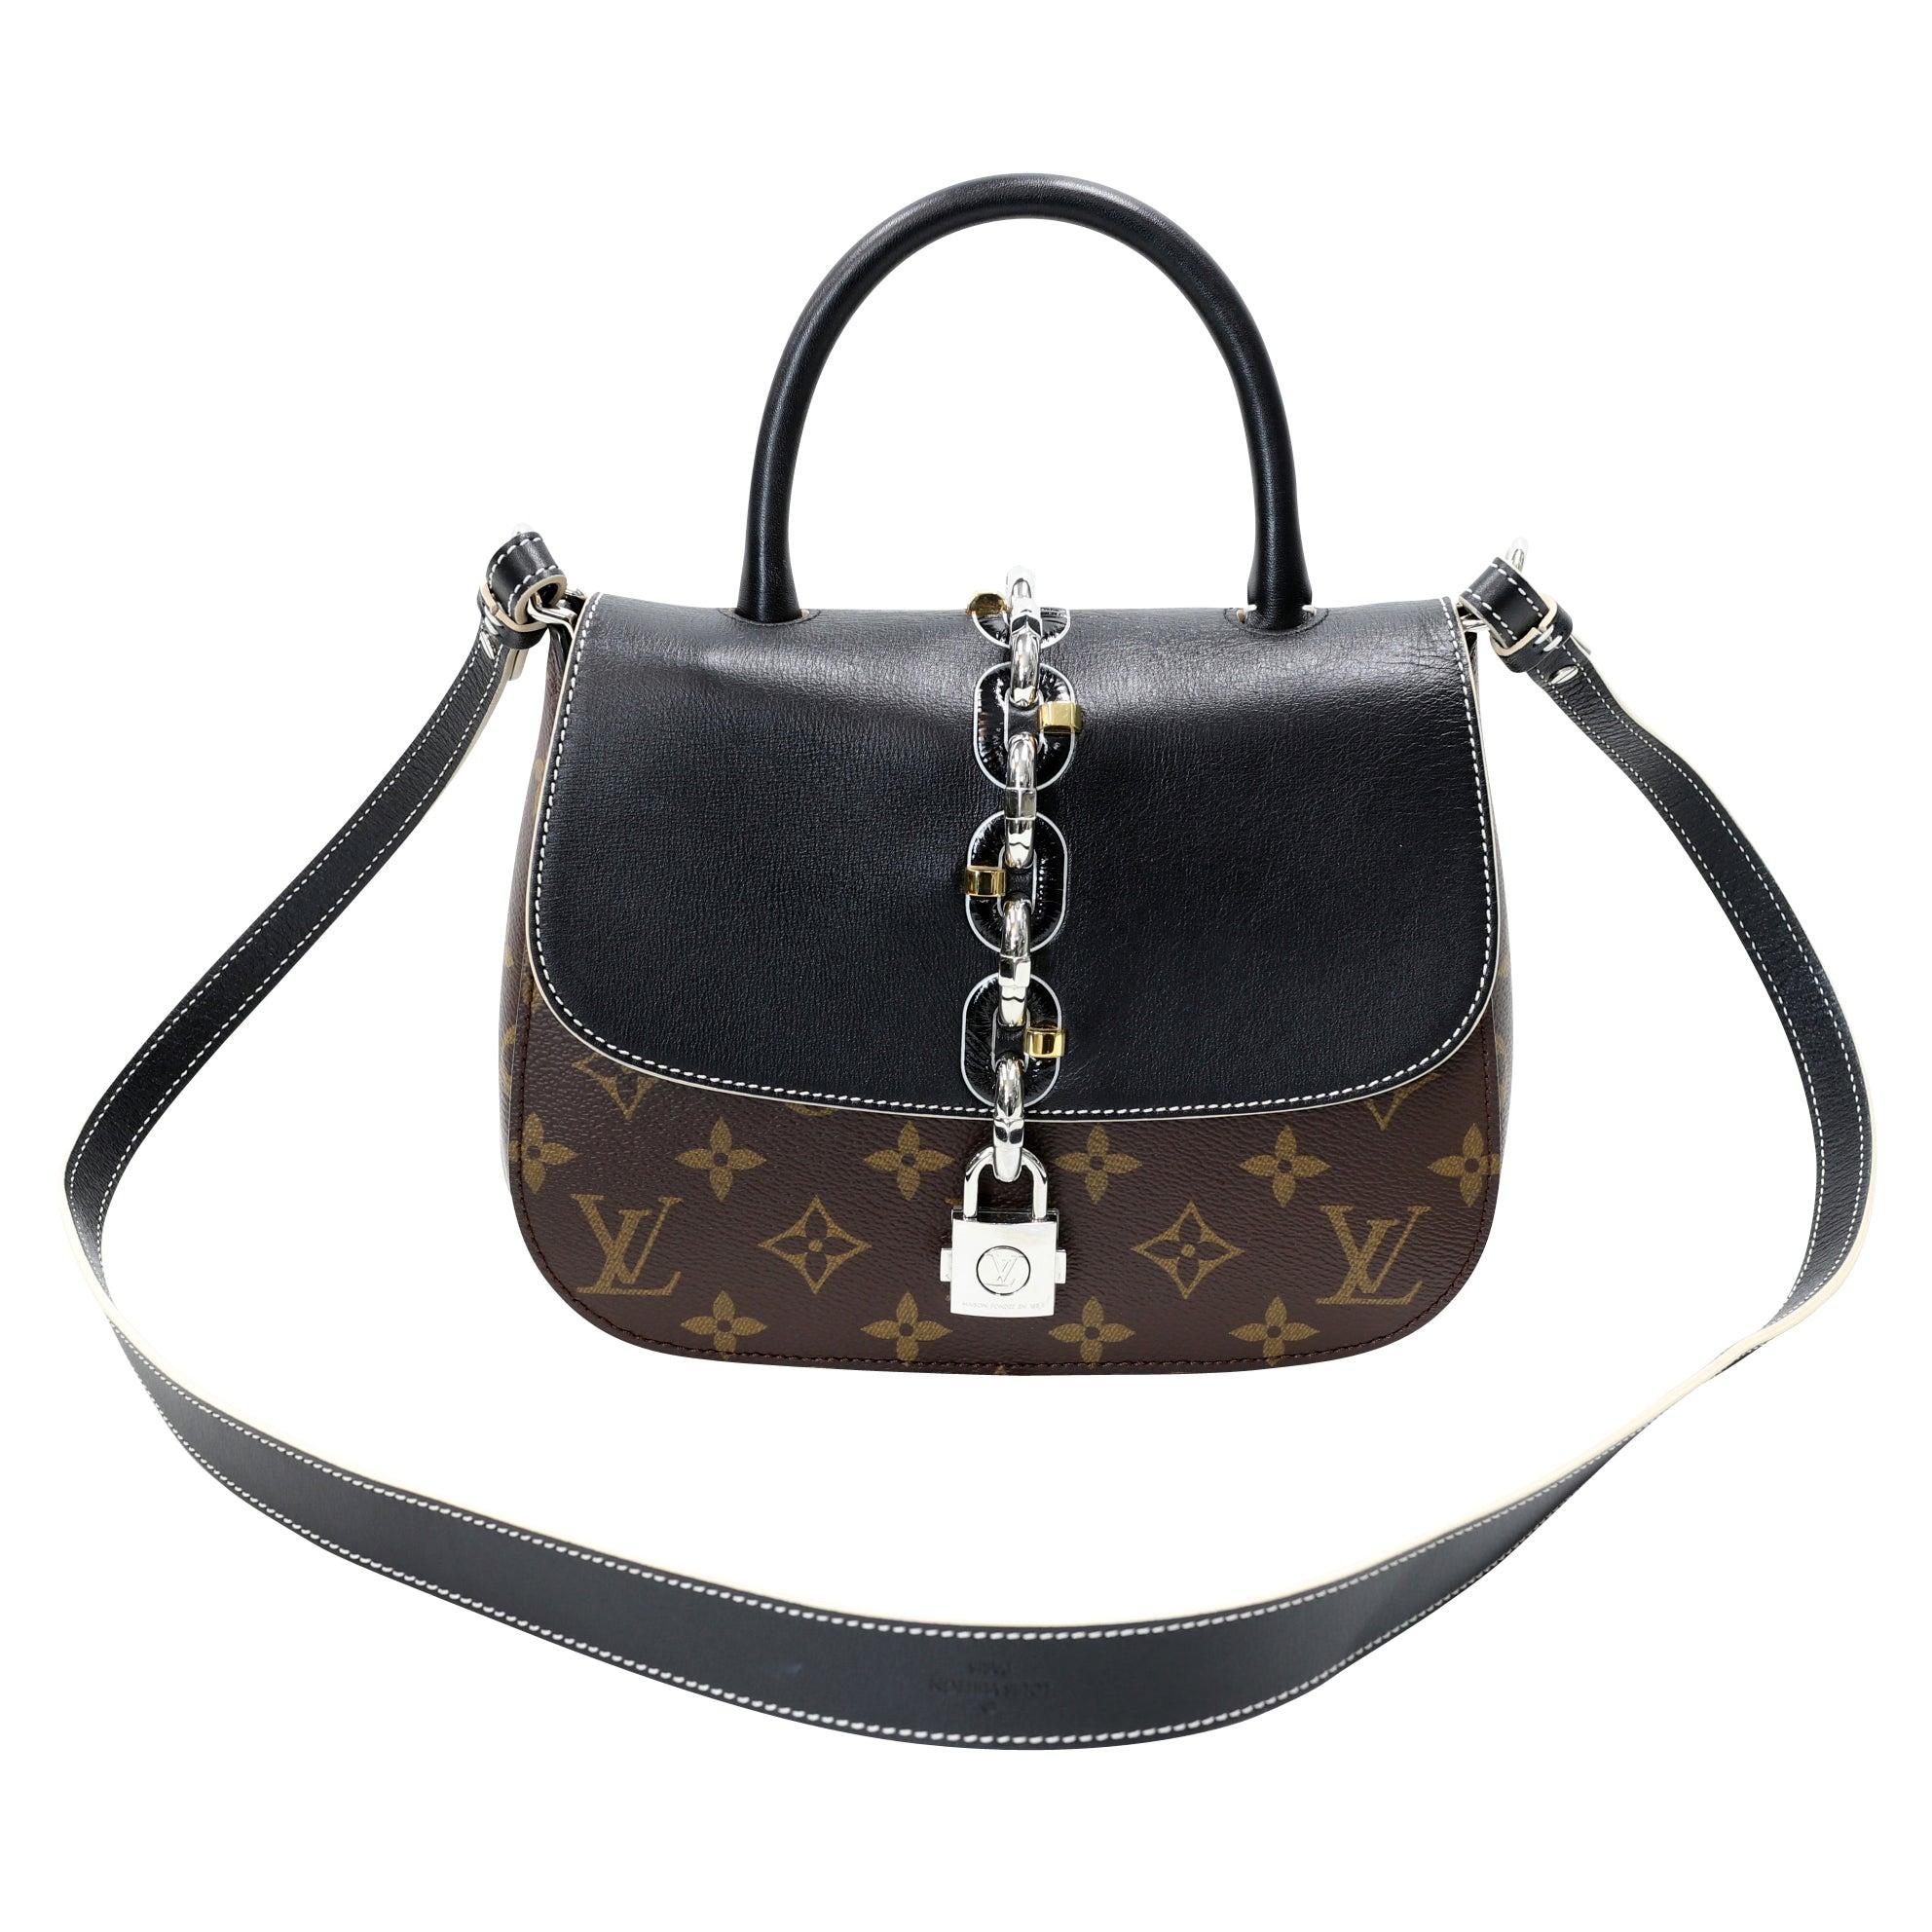 Surprising small model Chain It Louis Vuitton shoulder bag in monogram canvas and black leather, hardware in gilt and silver metal , simple handle in black leather, one shoulder strap in black leather allowing the bag to be worn in the hand or on